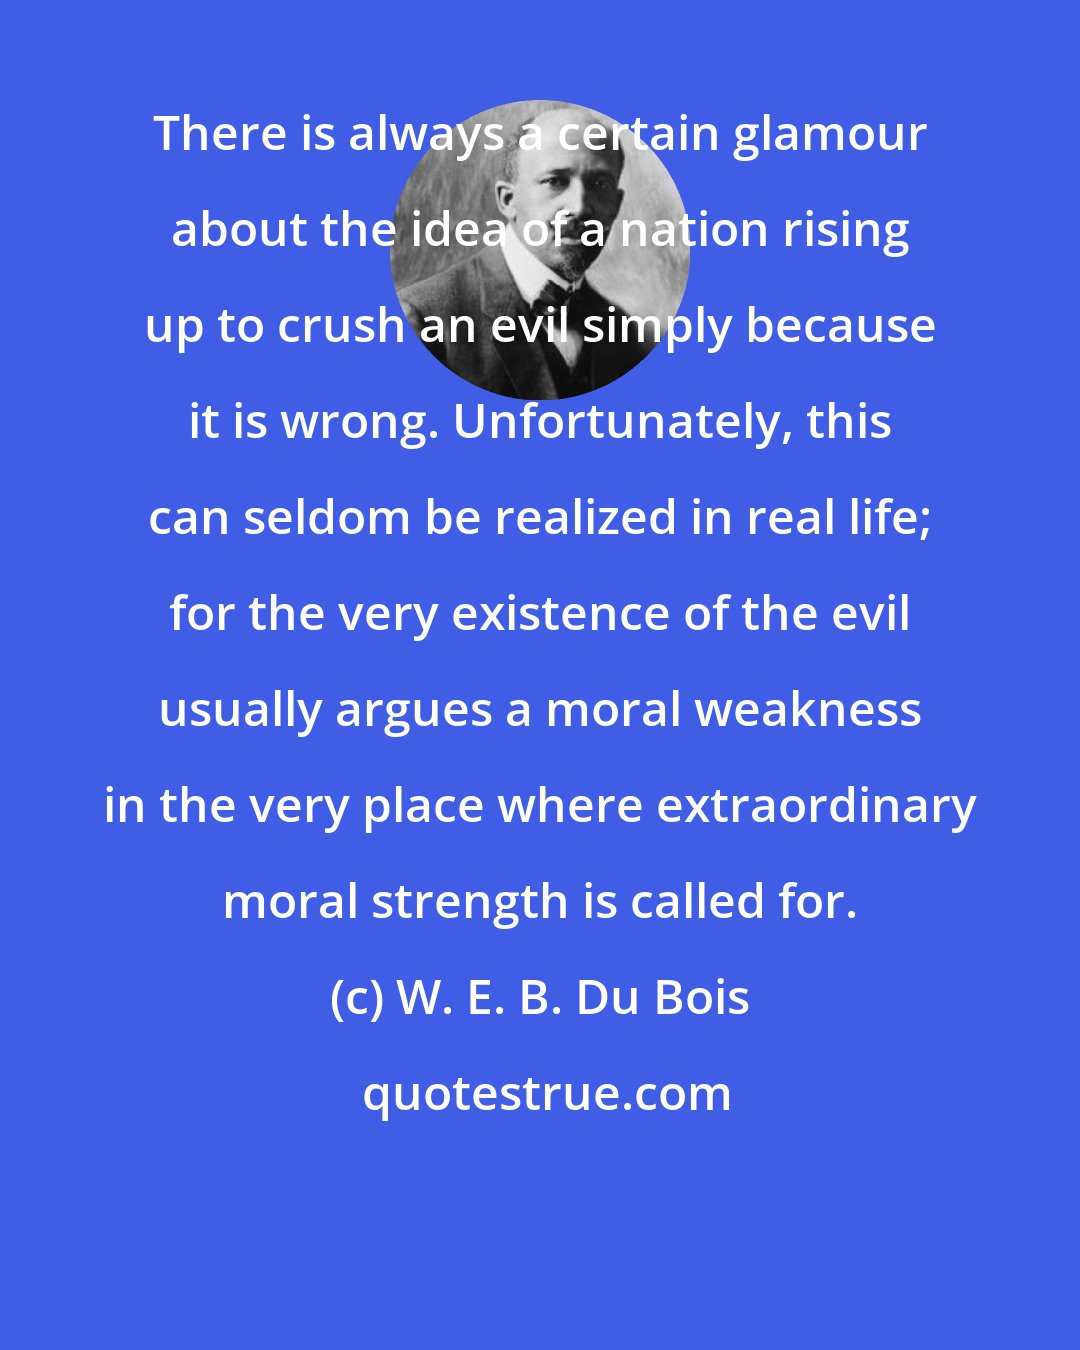 W. E. B. Du Bois: There is always a certain glamour about the idea of a nation rising up to crush an evil simply because it is wrong. Unfortunately, this can seldom be realized in real life; for the very existence of the evil usually argues a moral weakness in the very place where extraordinary moral strength is called for.